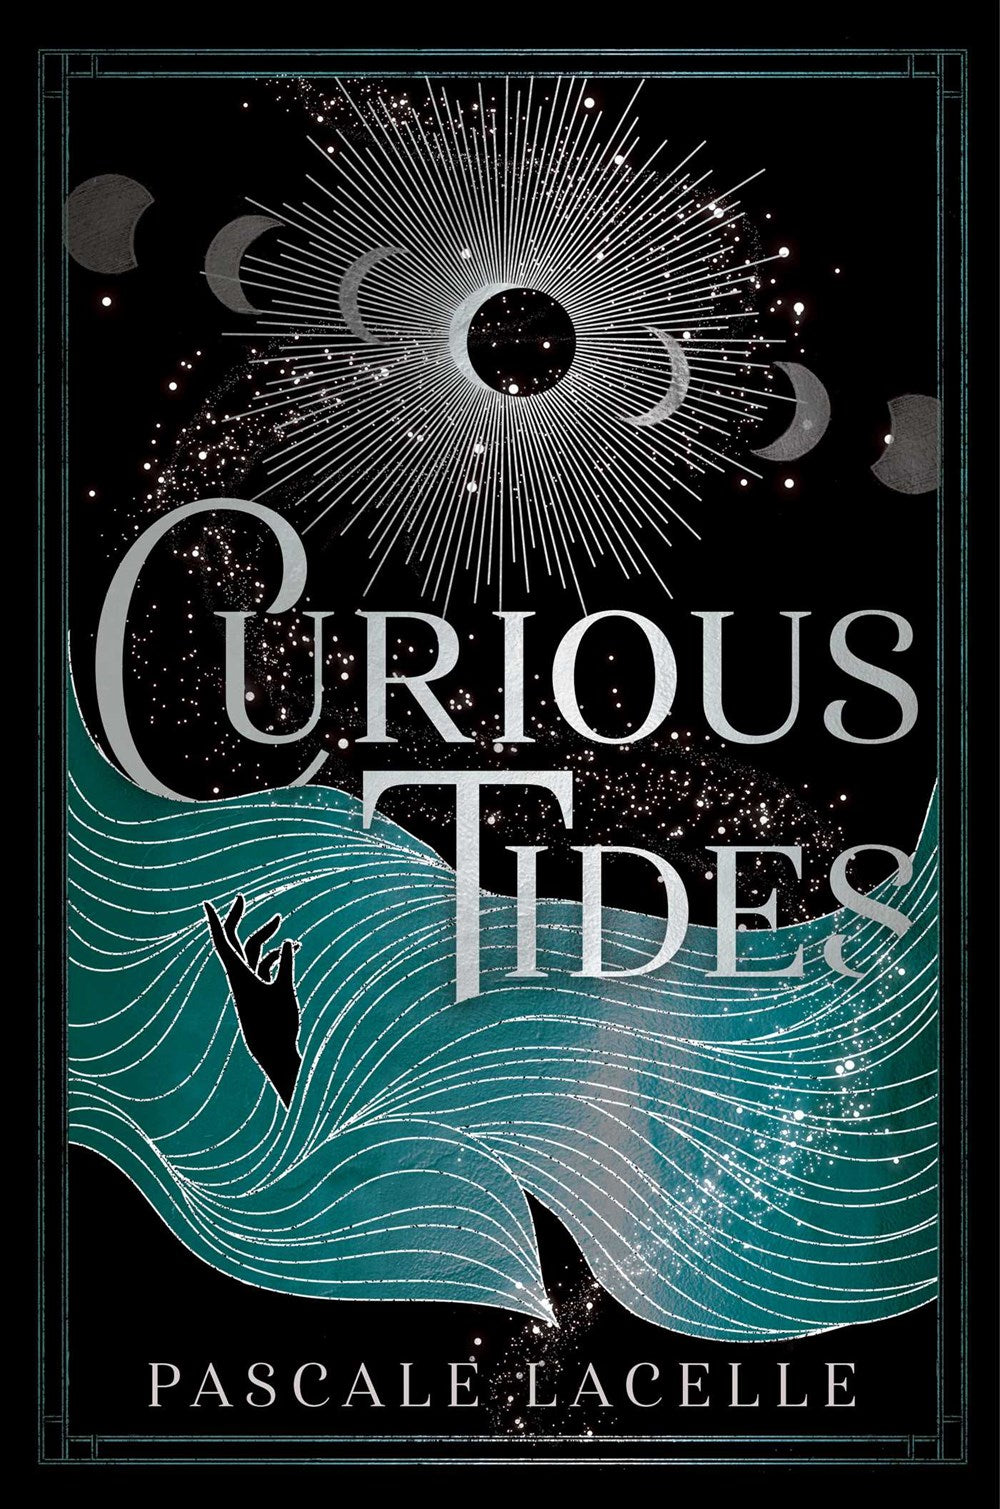 Curious Tides (The Drowned Gods Duology)